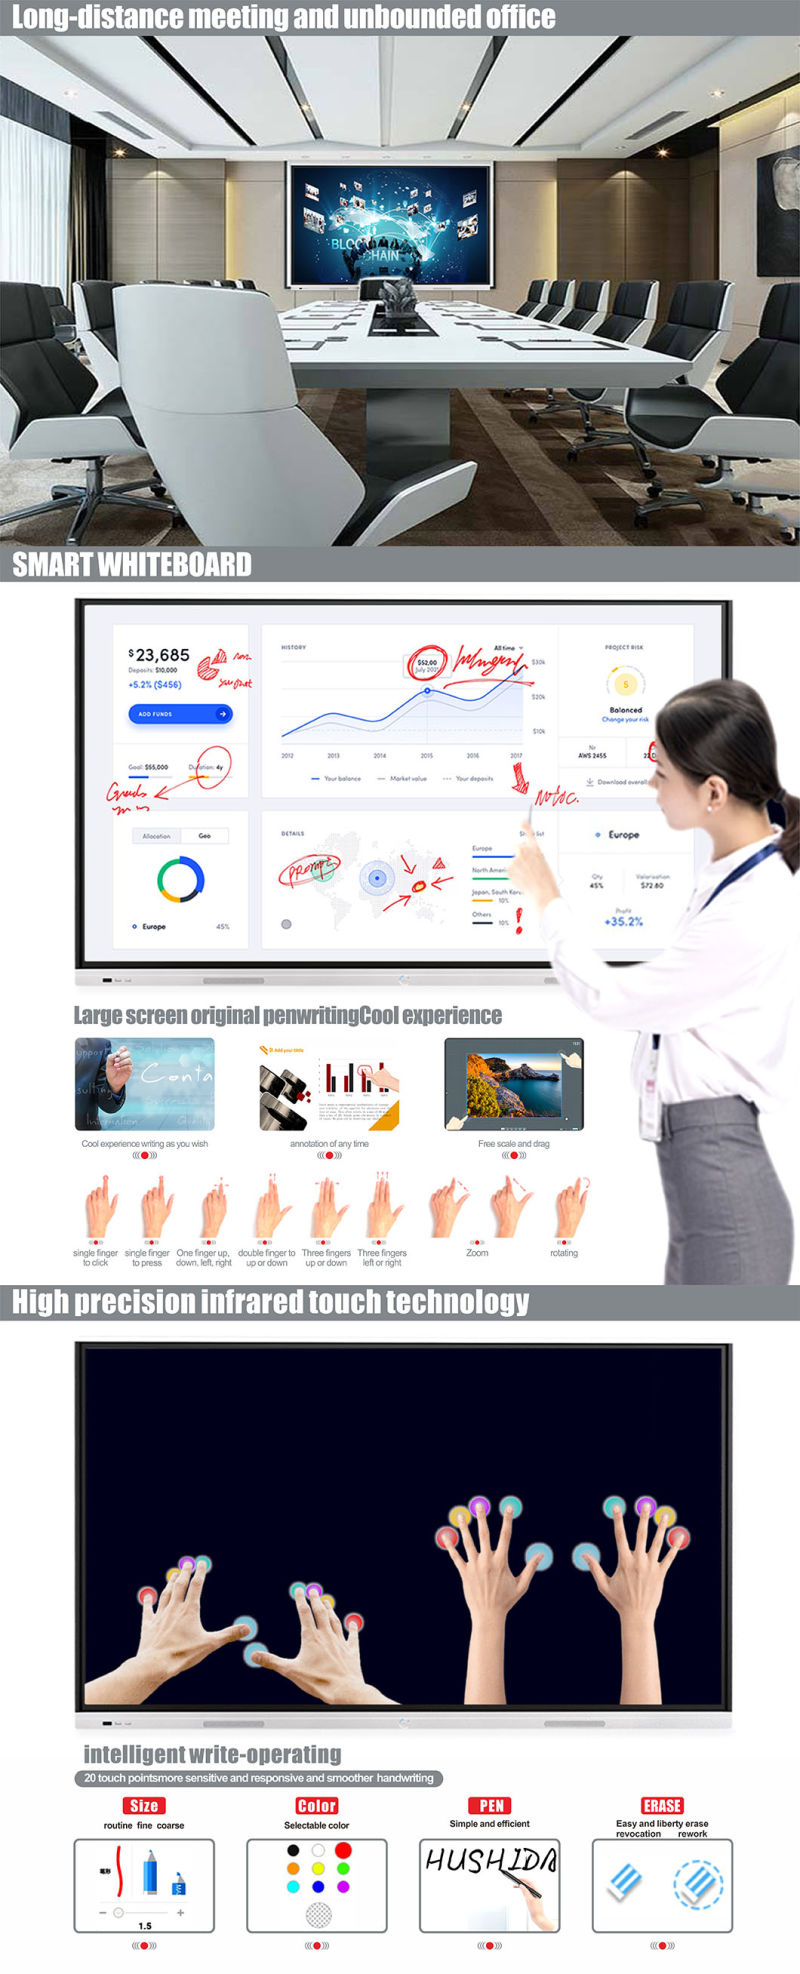 T6 Series 75" Interactive Electronic Whiteboards for Business